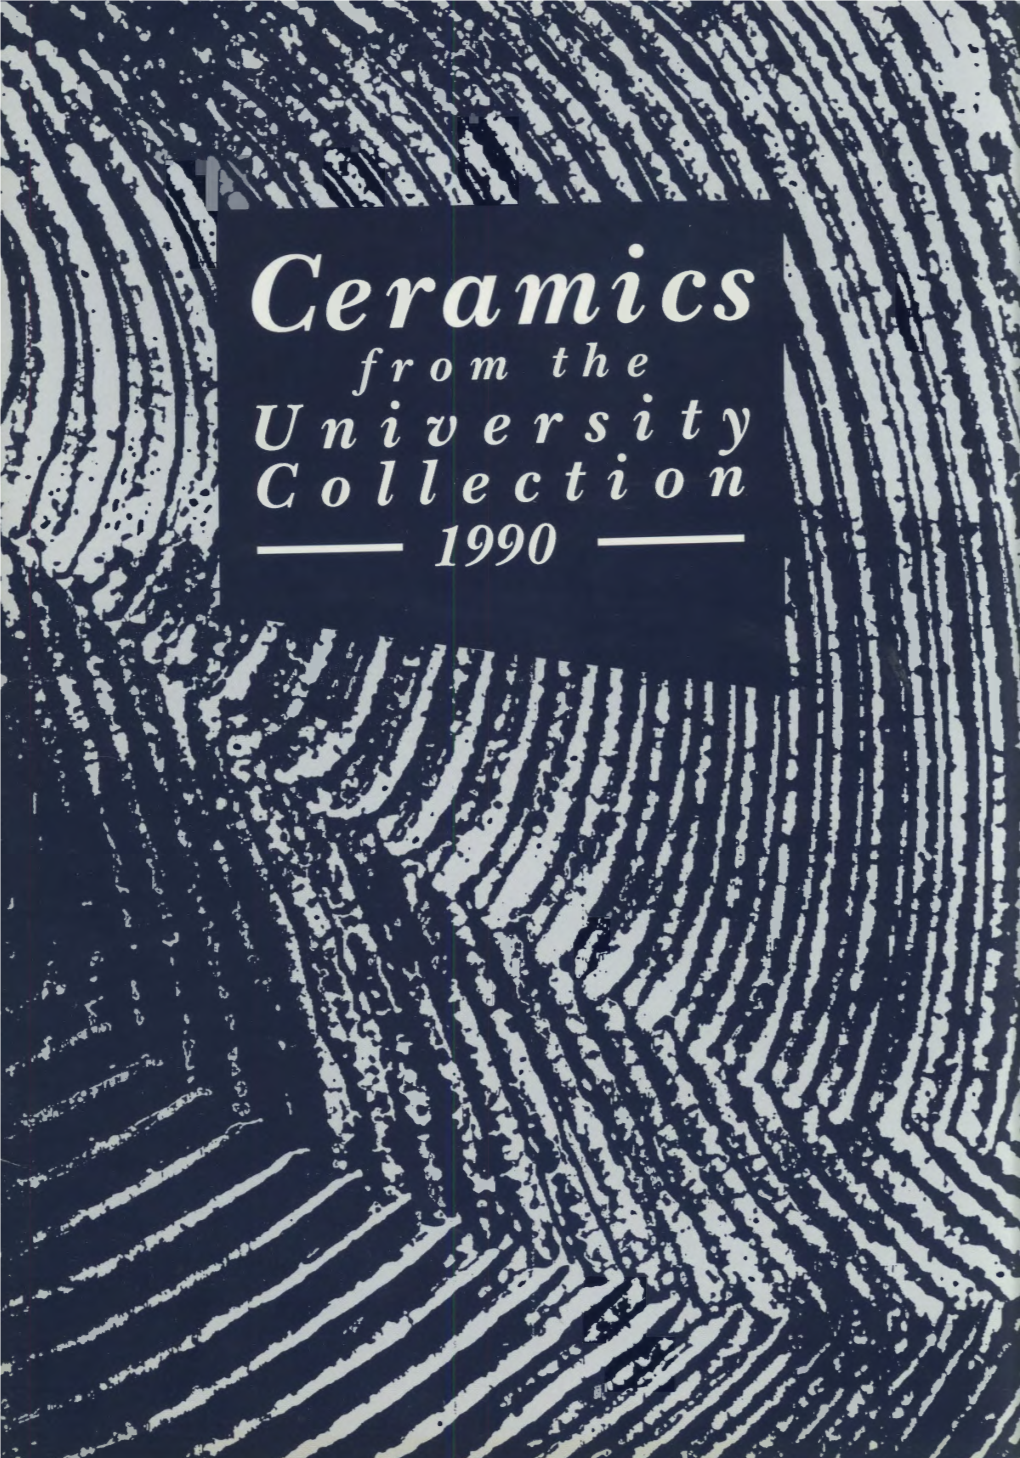 Ceramics from the University Collection 1990 : Works by 22 Artists